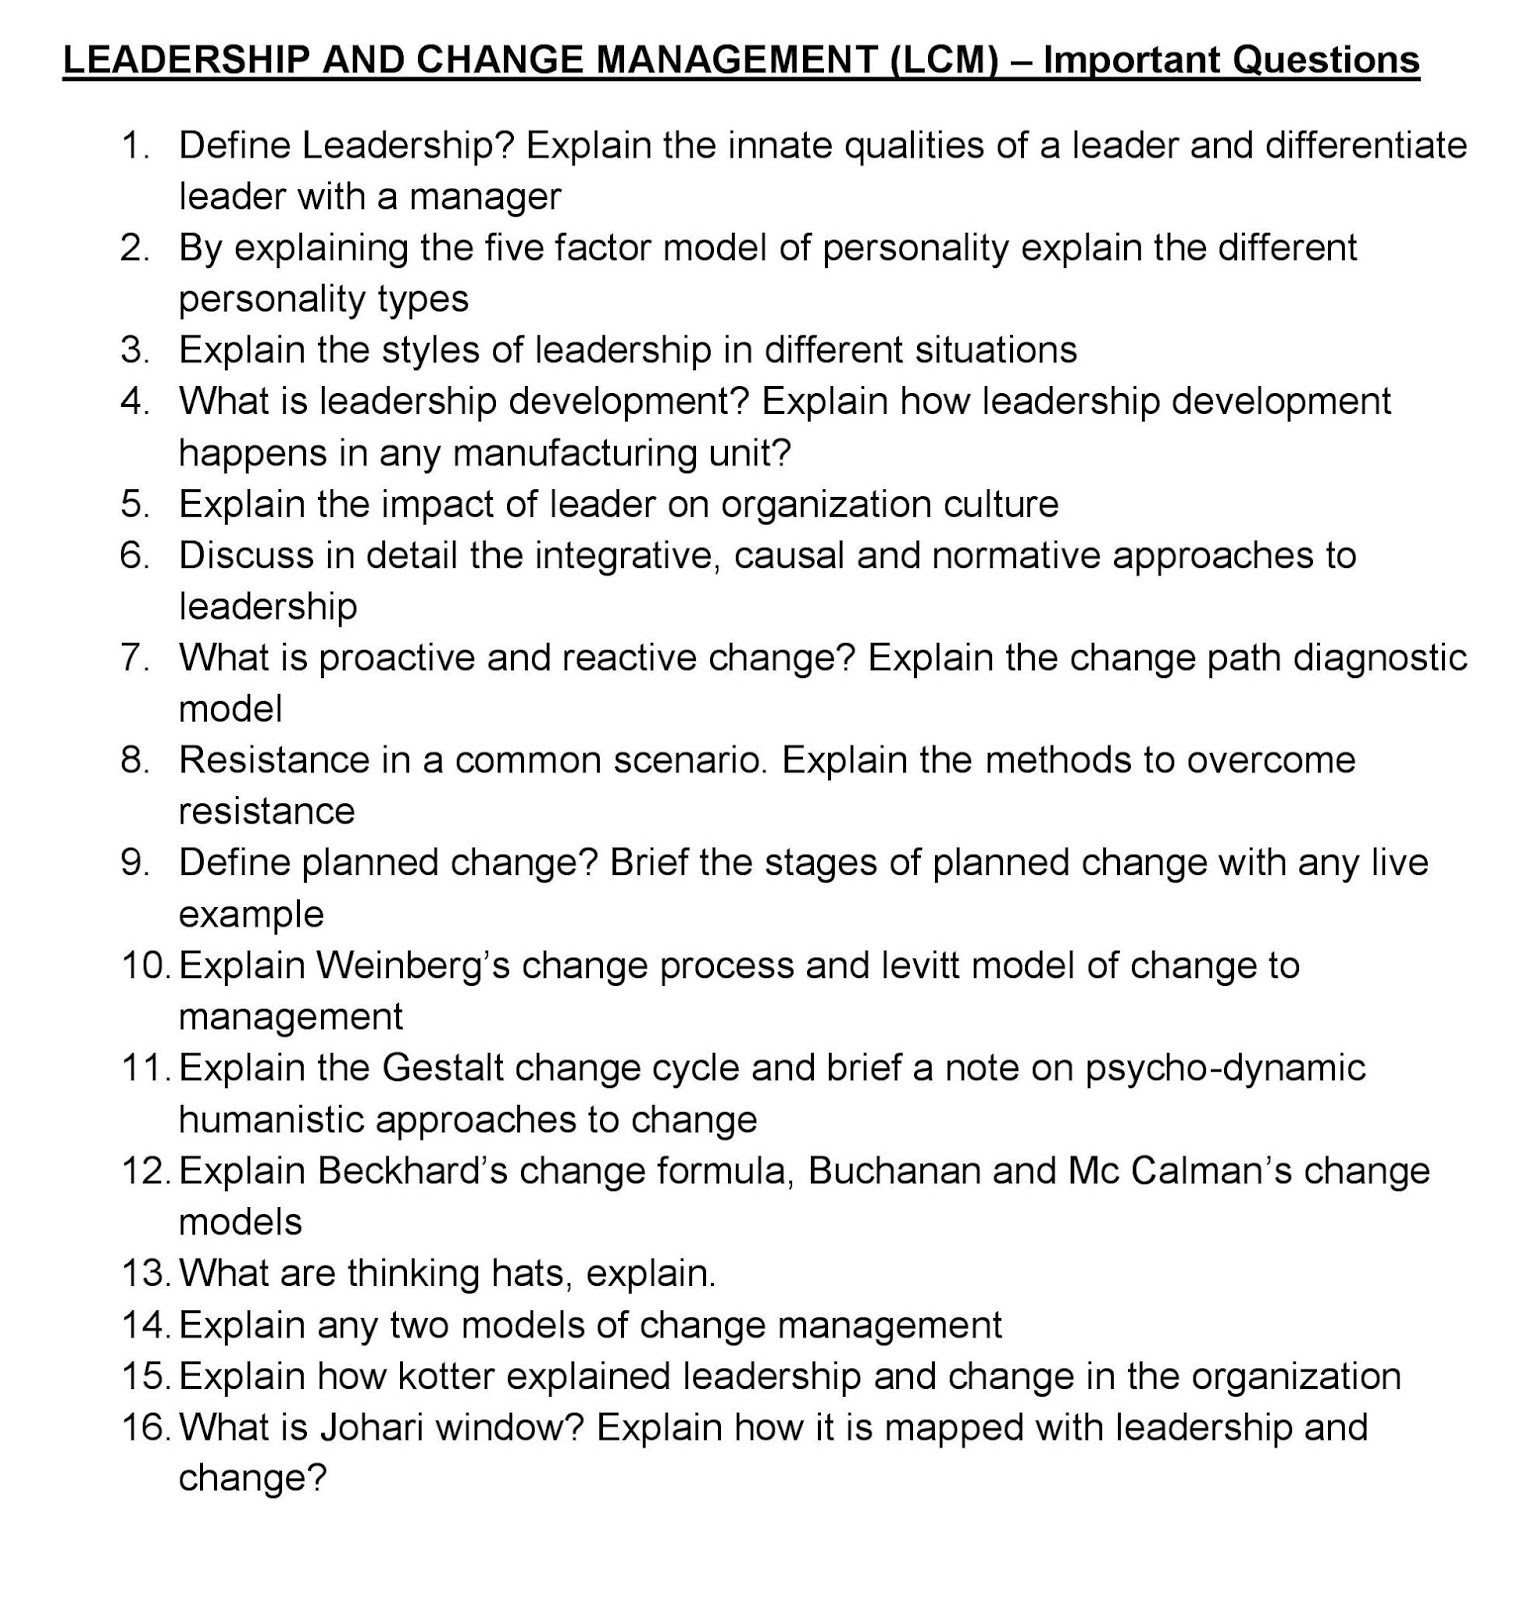 questions to ask leaders about change